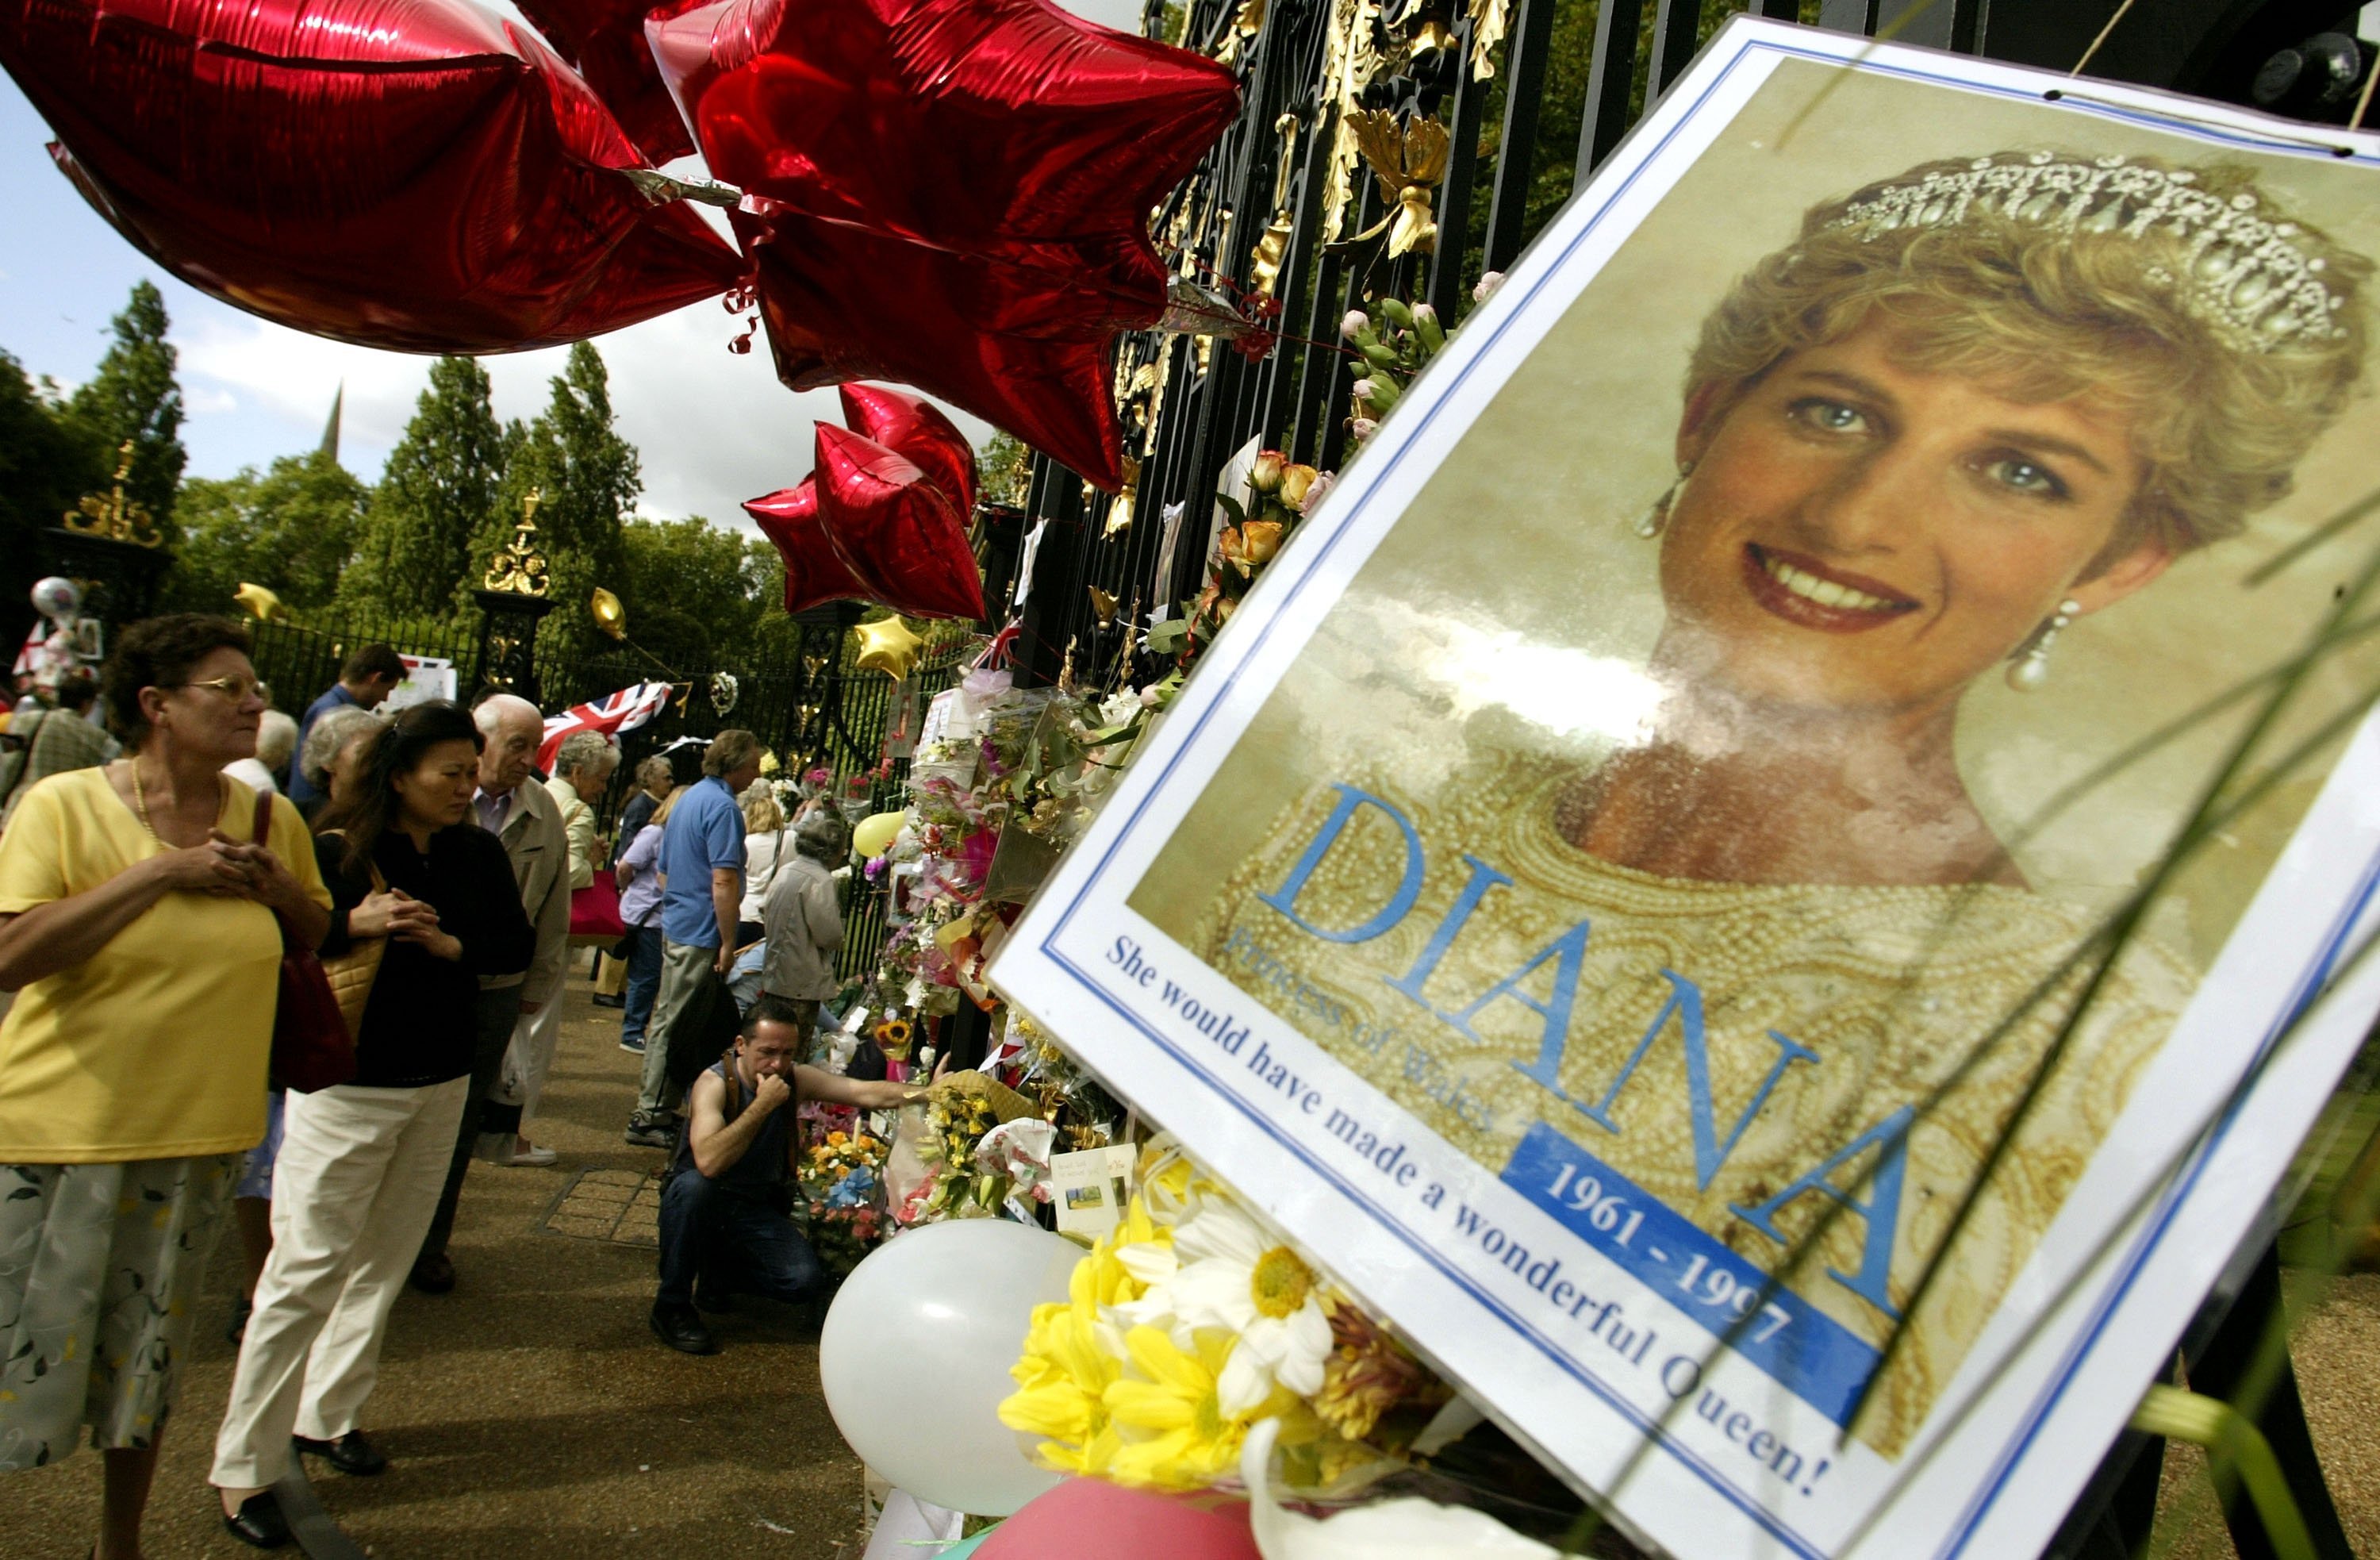 People placing flowers balloons and pictures of Princess Diana outside the gates of Kensington Palace in London, England | Photo: Getty Images